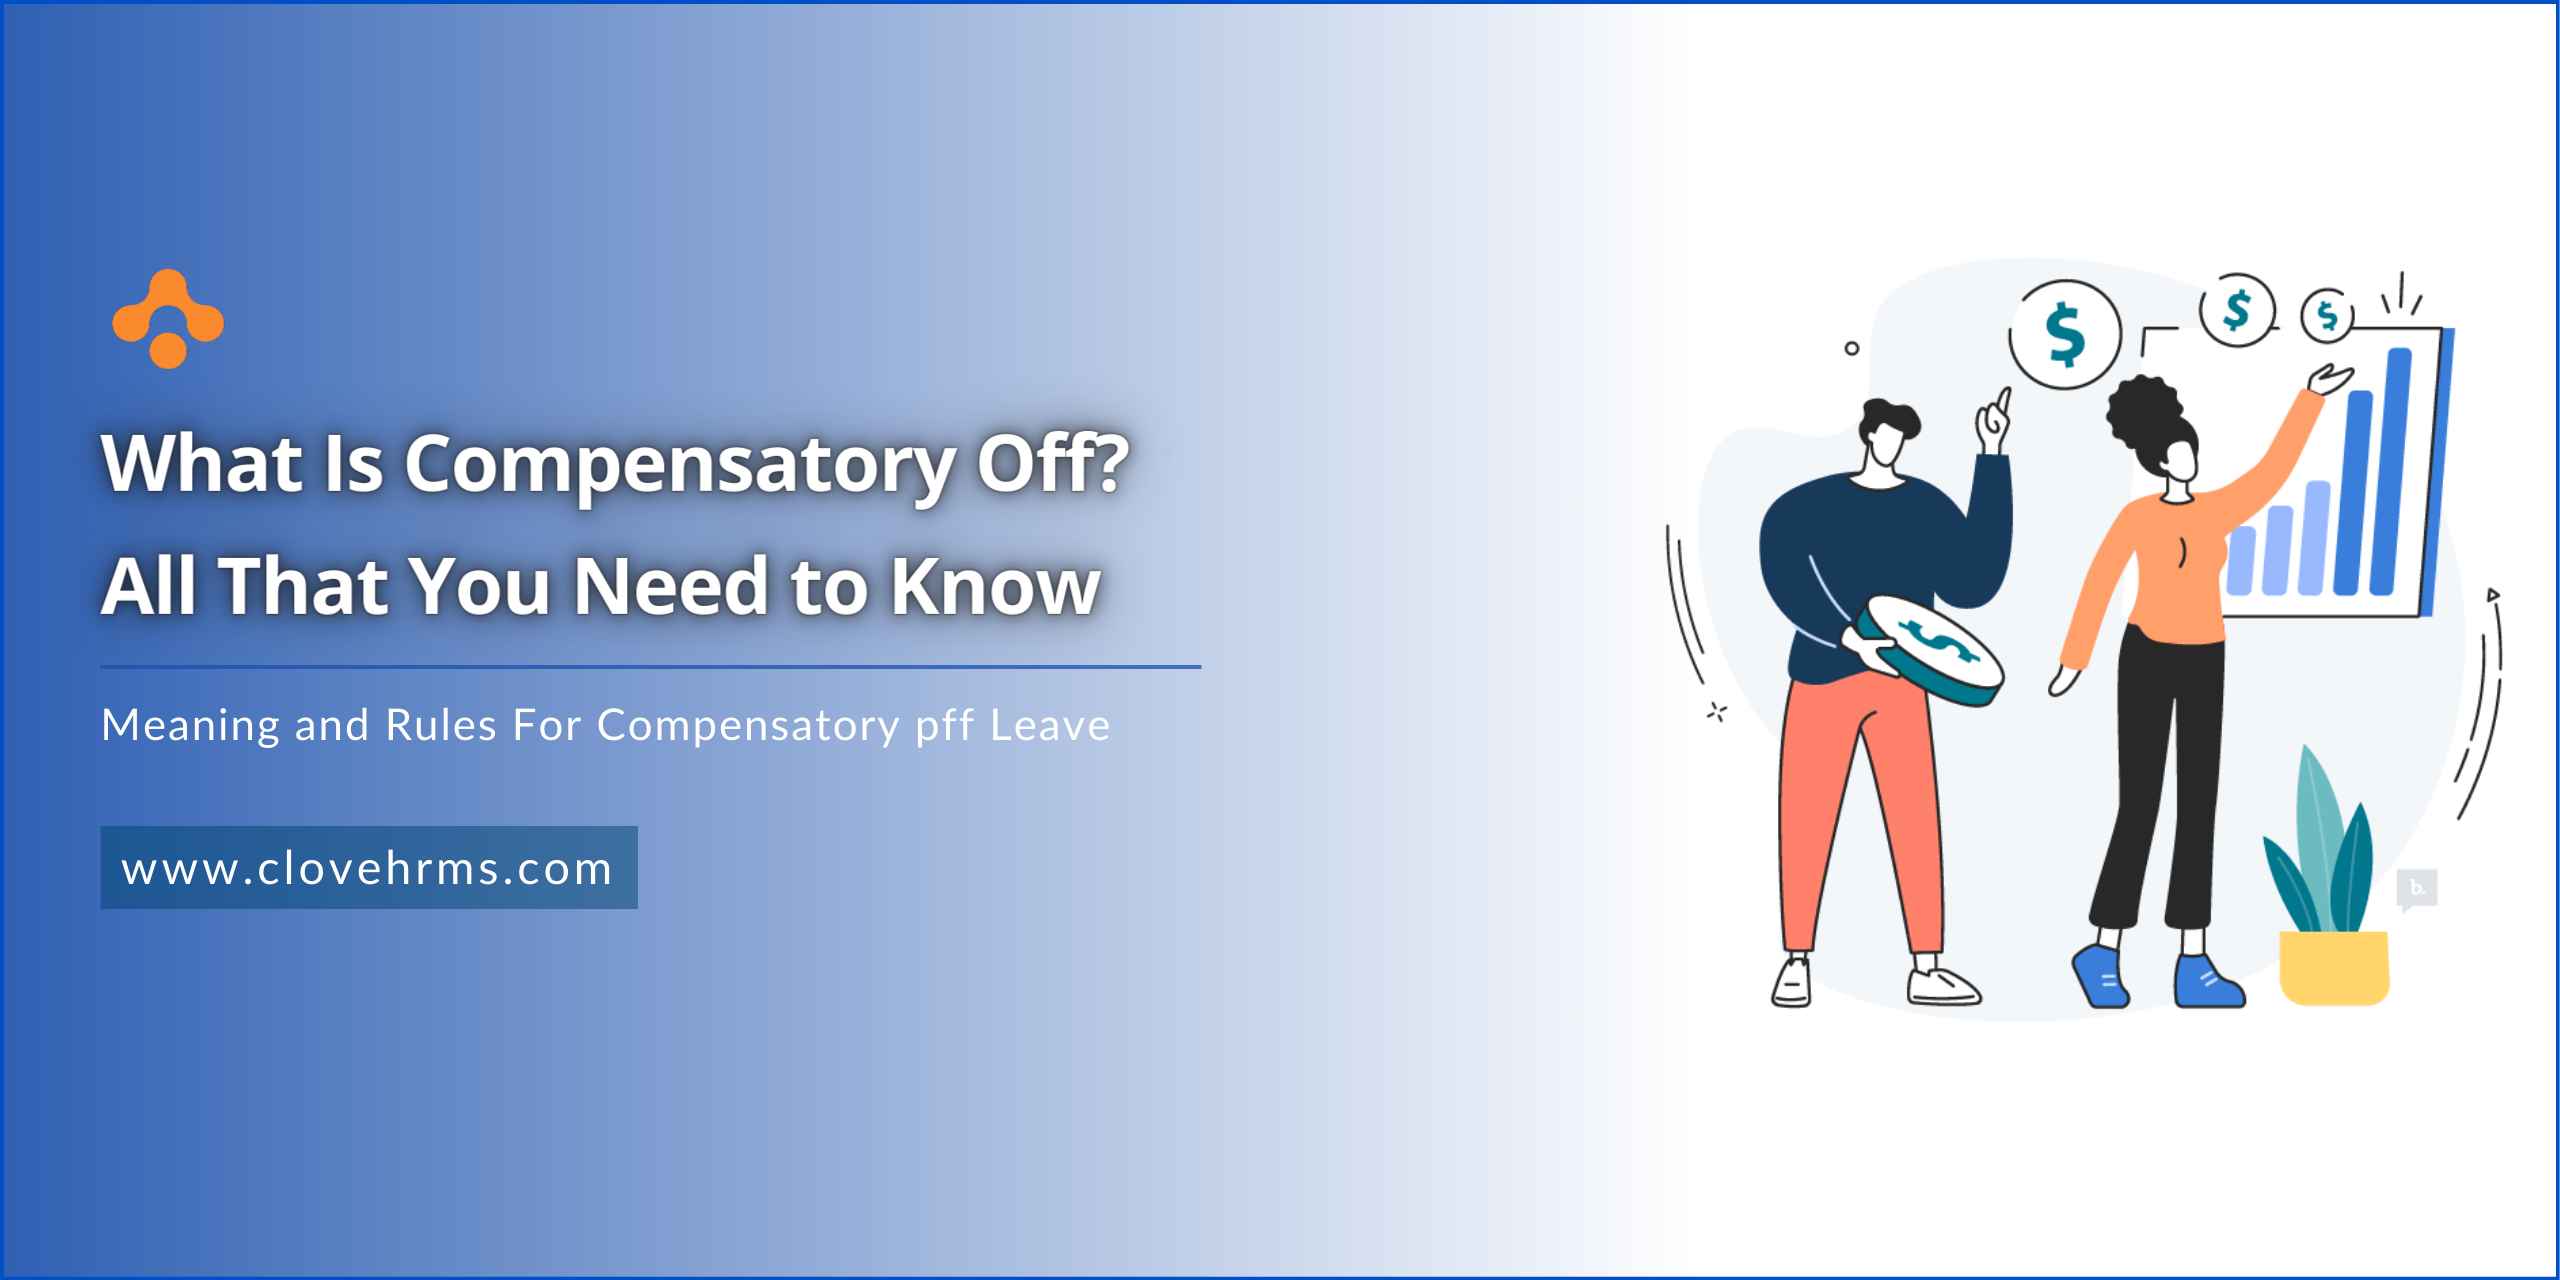 Feature image for compensatory off blog